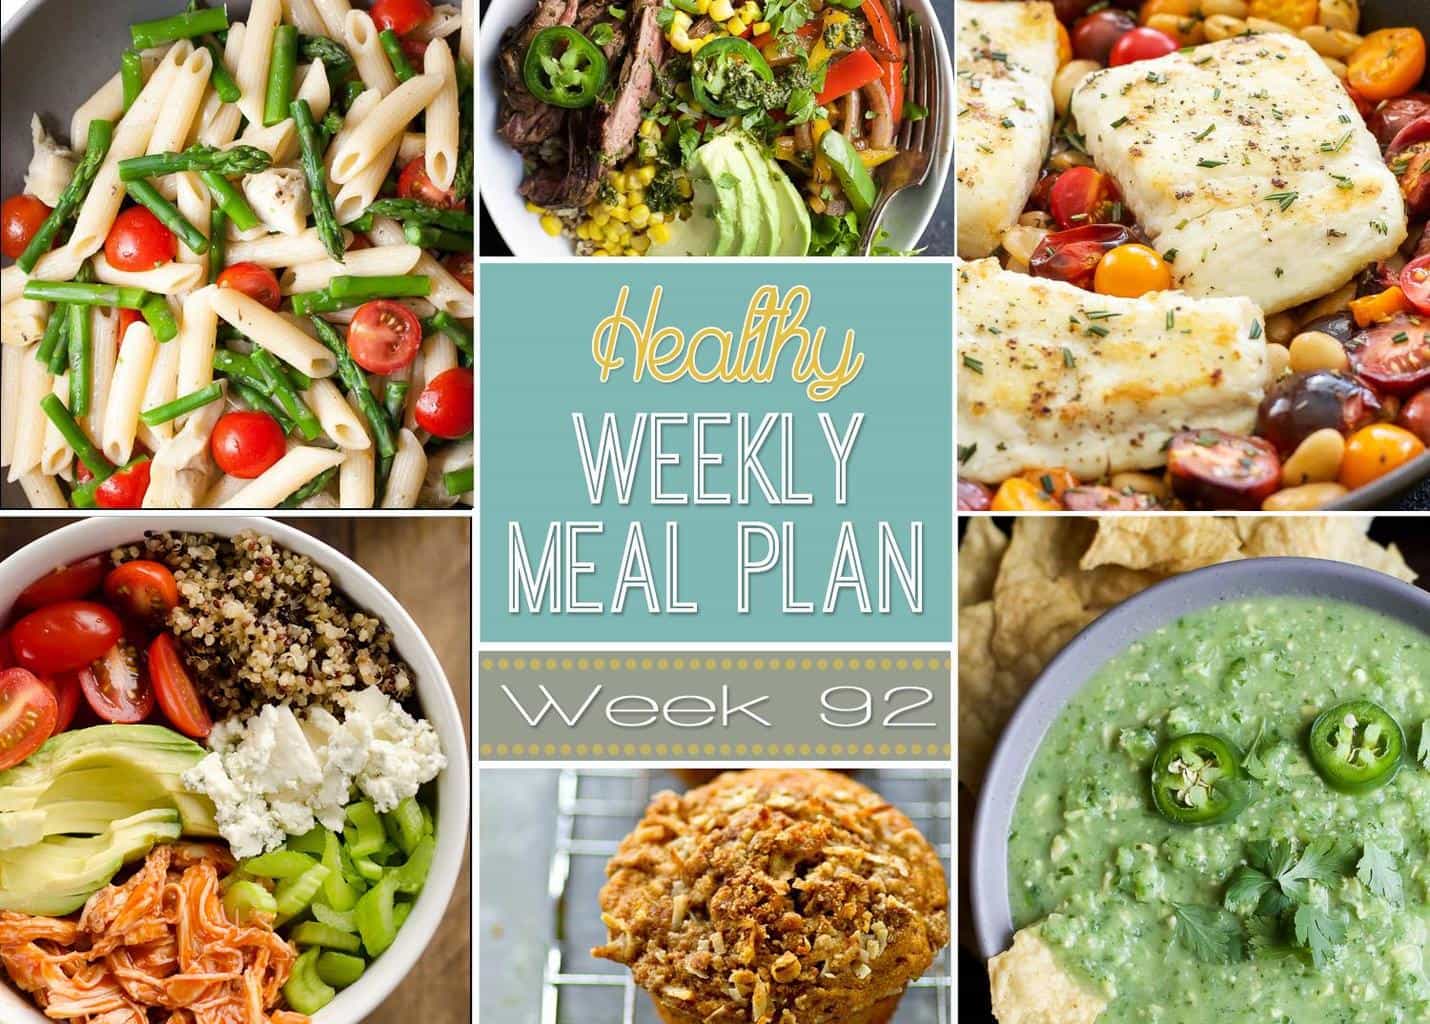 How Do I Make My Weekly Meal Plan